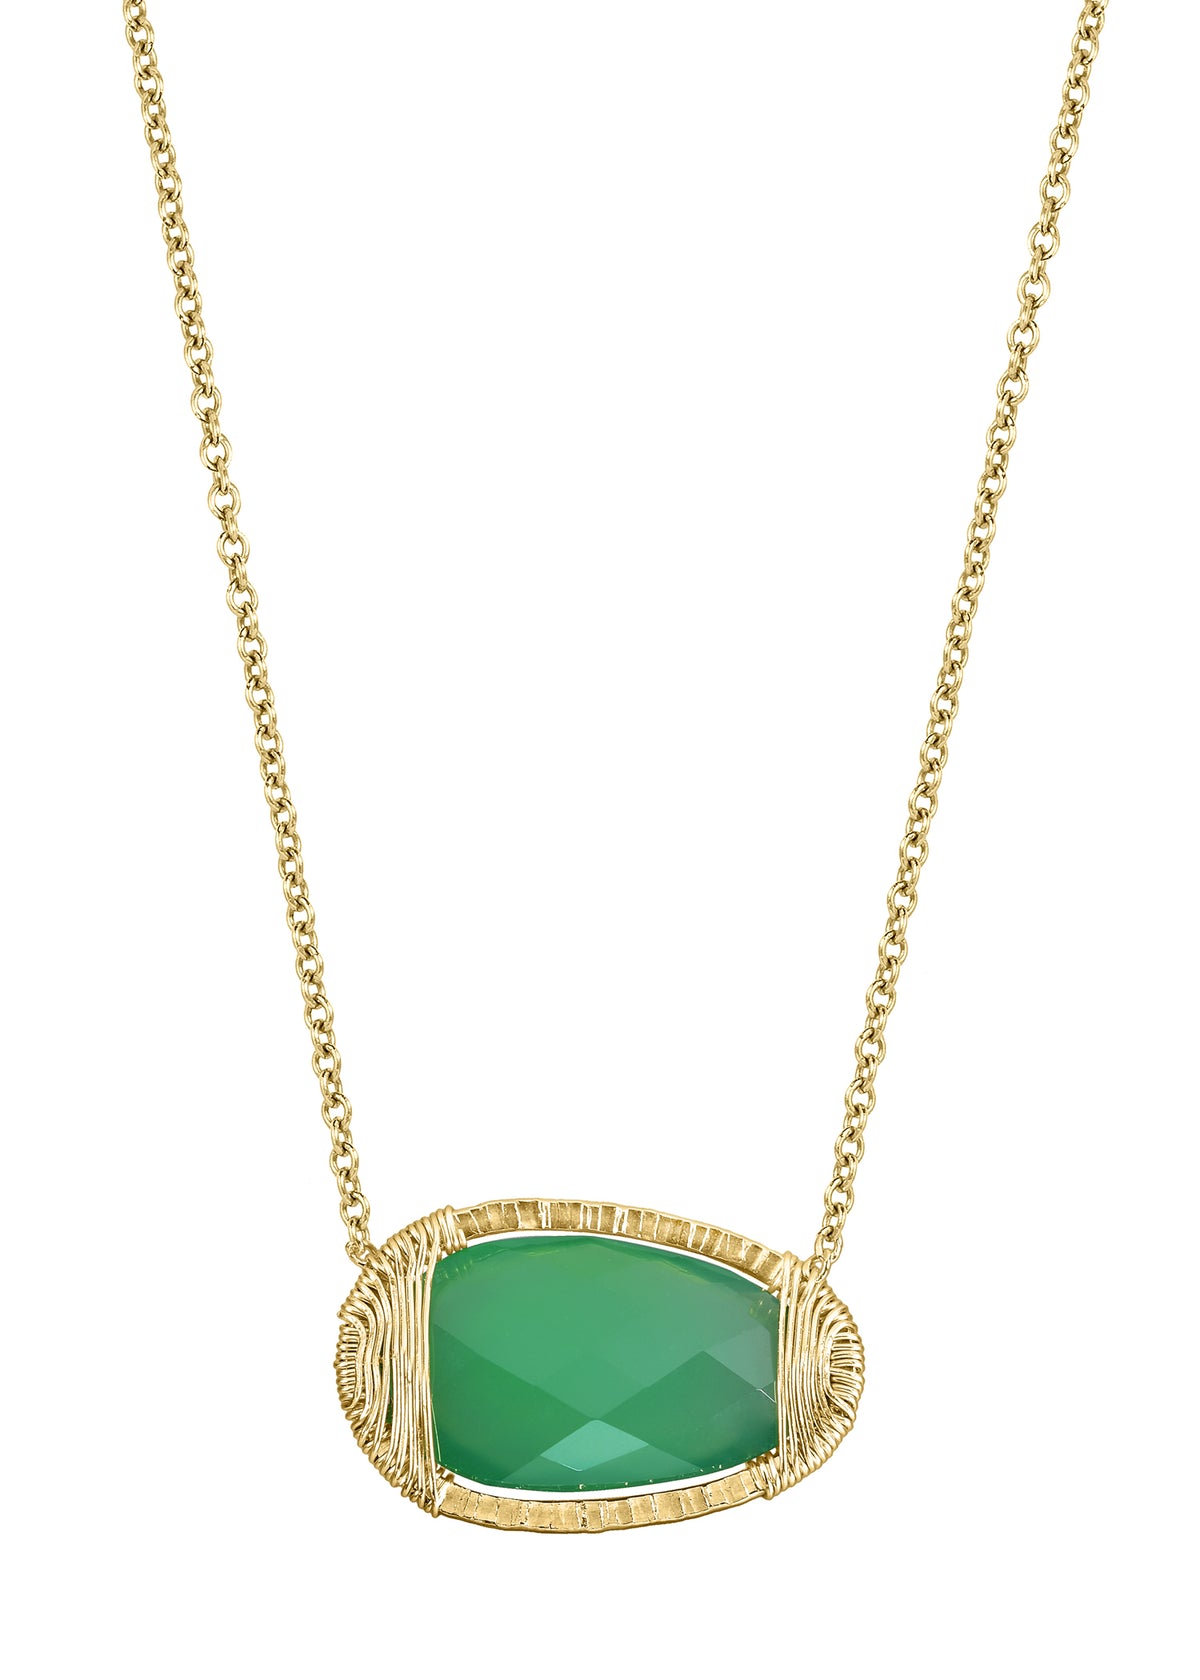 Green onyx 14k gold fill Necklace measures 15-7/8&quot; in length Pendant measures 1/2&quot; in length and 13/16&quot; in width Handmade in our Los Angeles studio